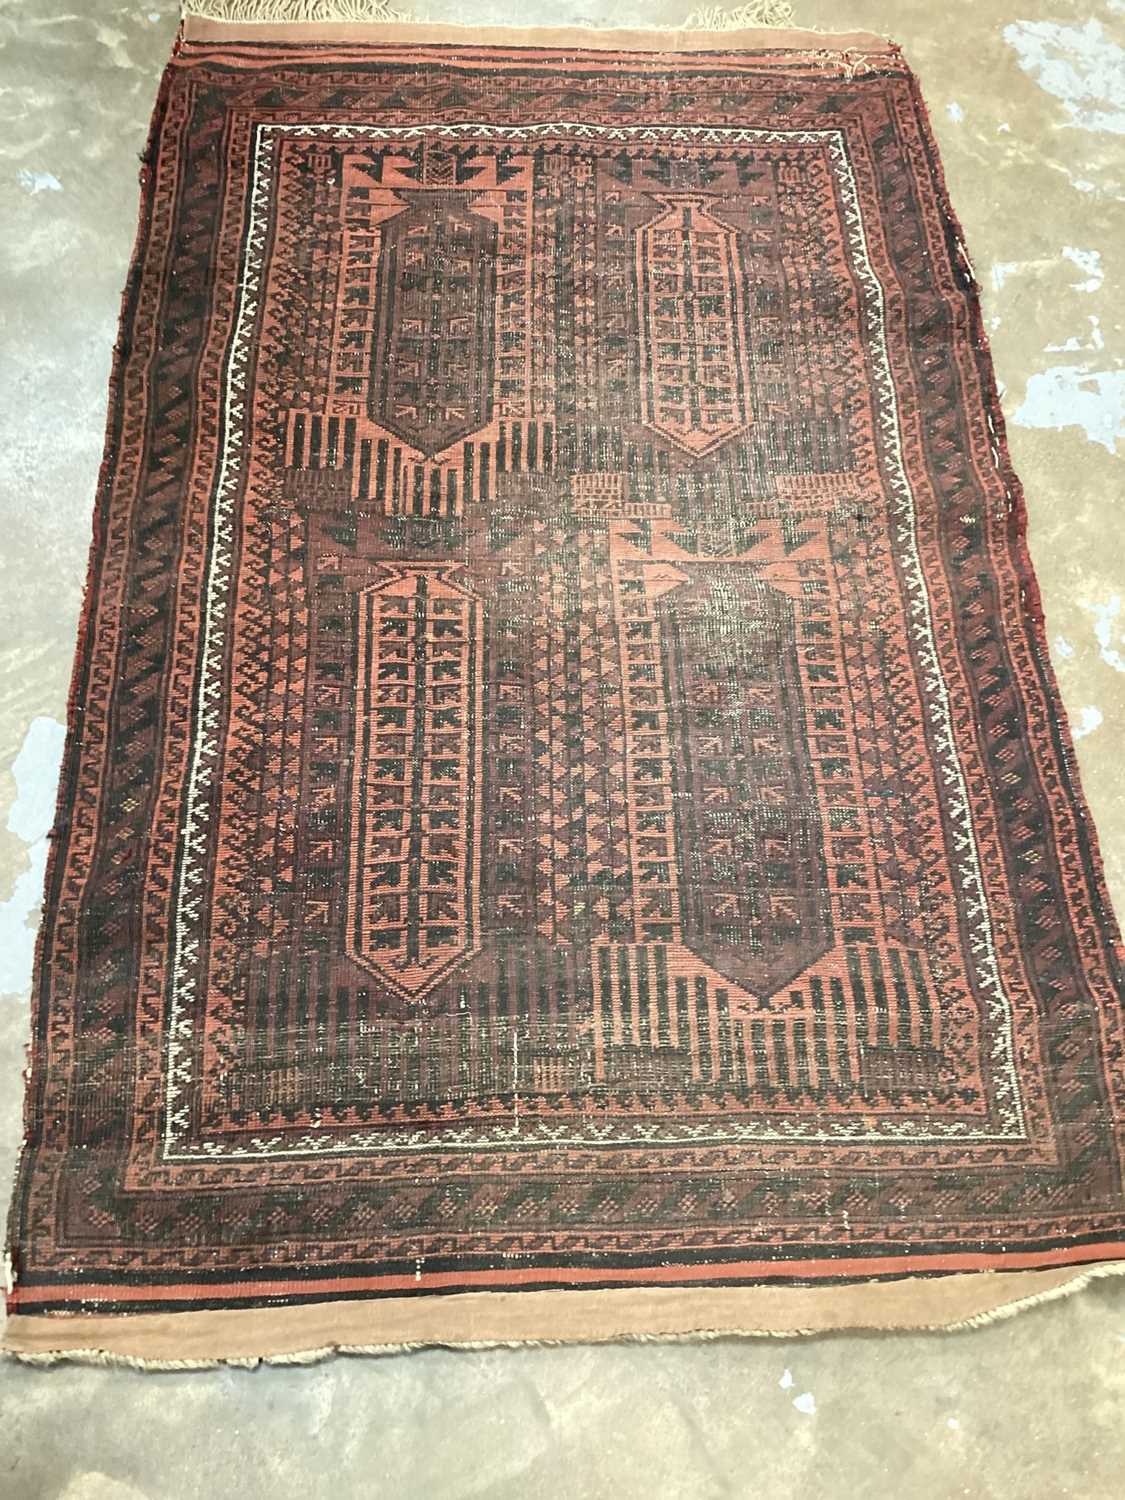 Two Eastern rugs with geometric decoration on red and blue ground, 175cm x 128cm - Image 6 of 6